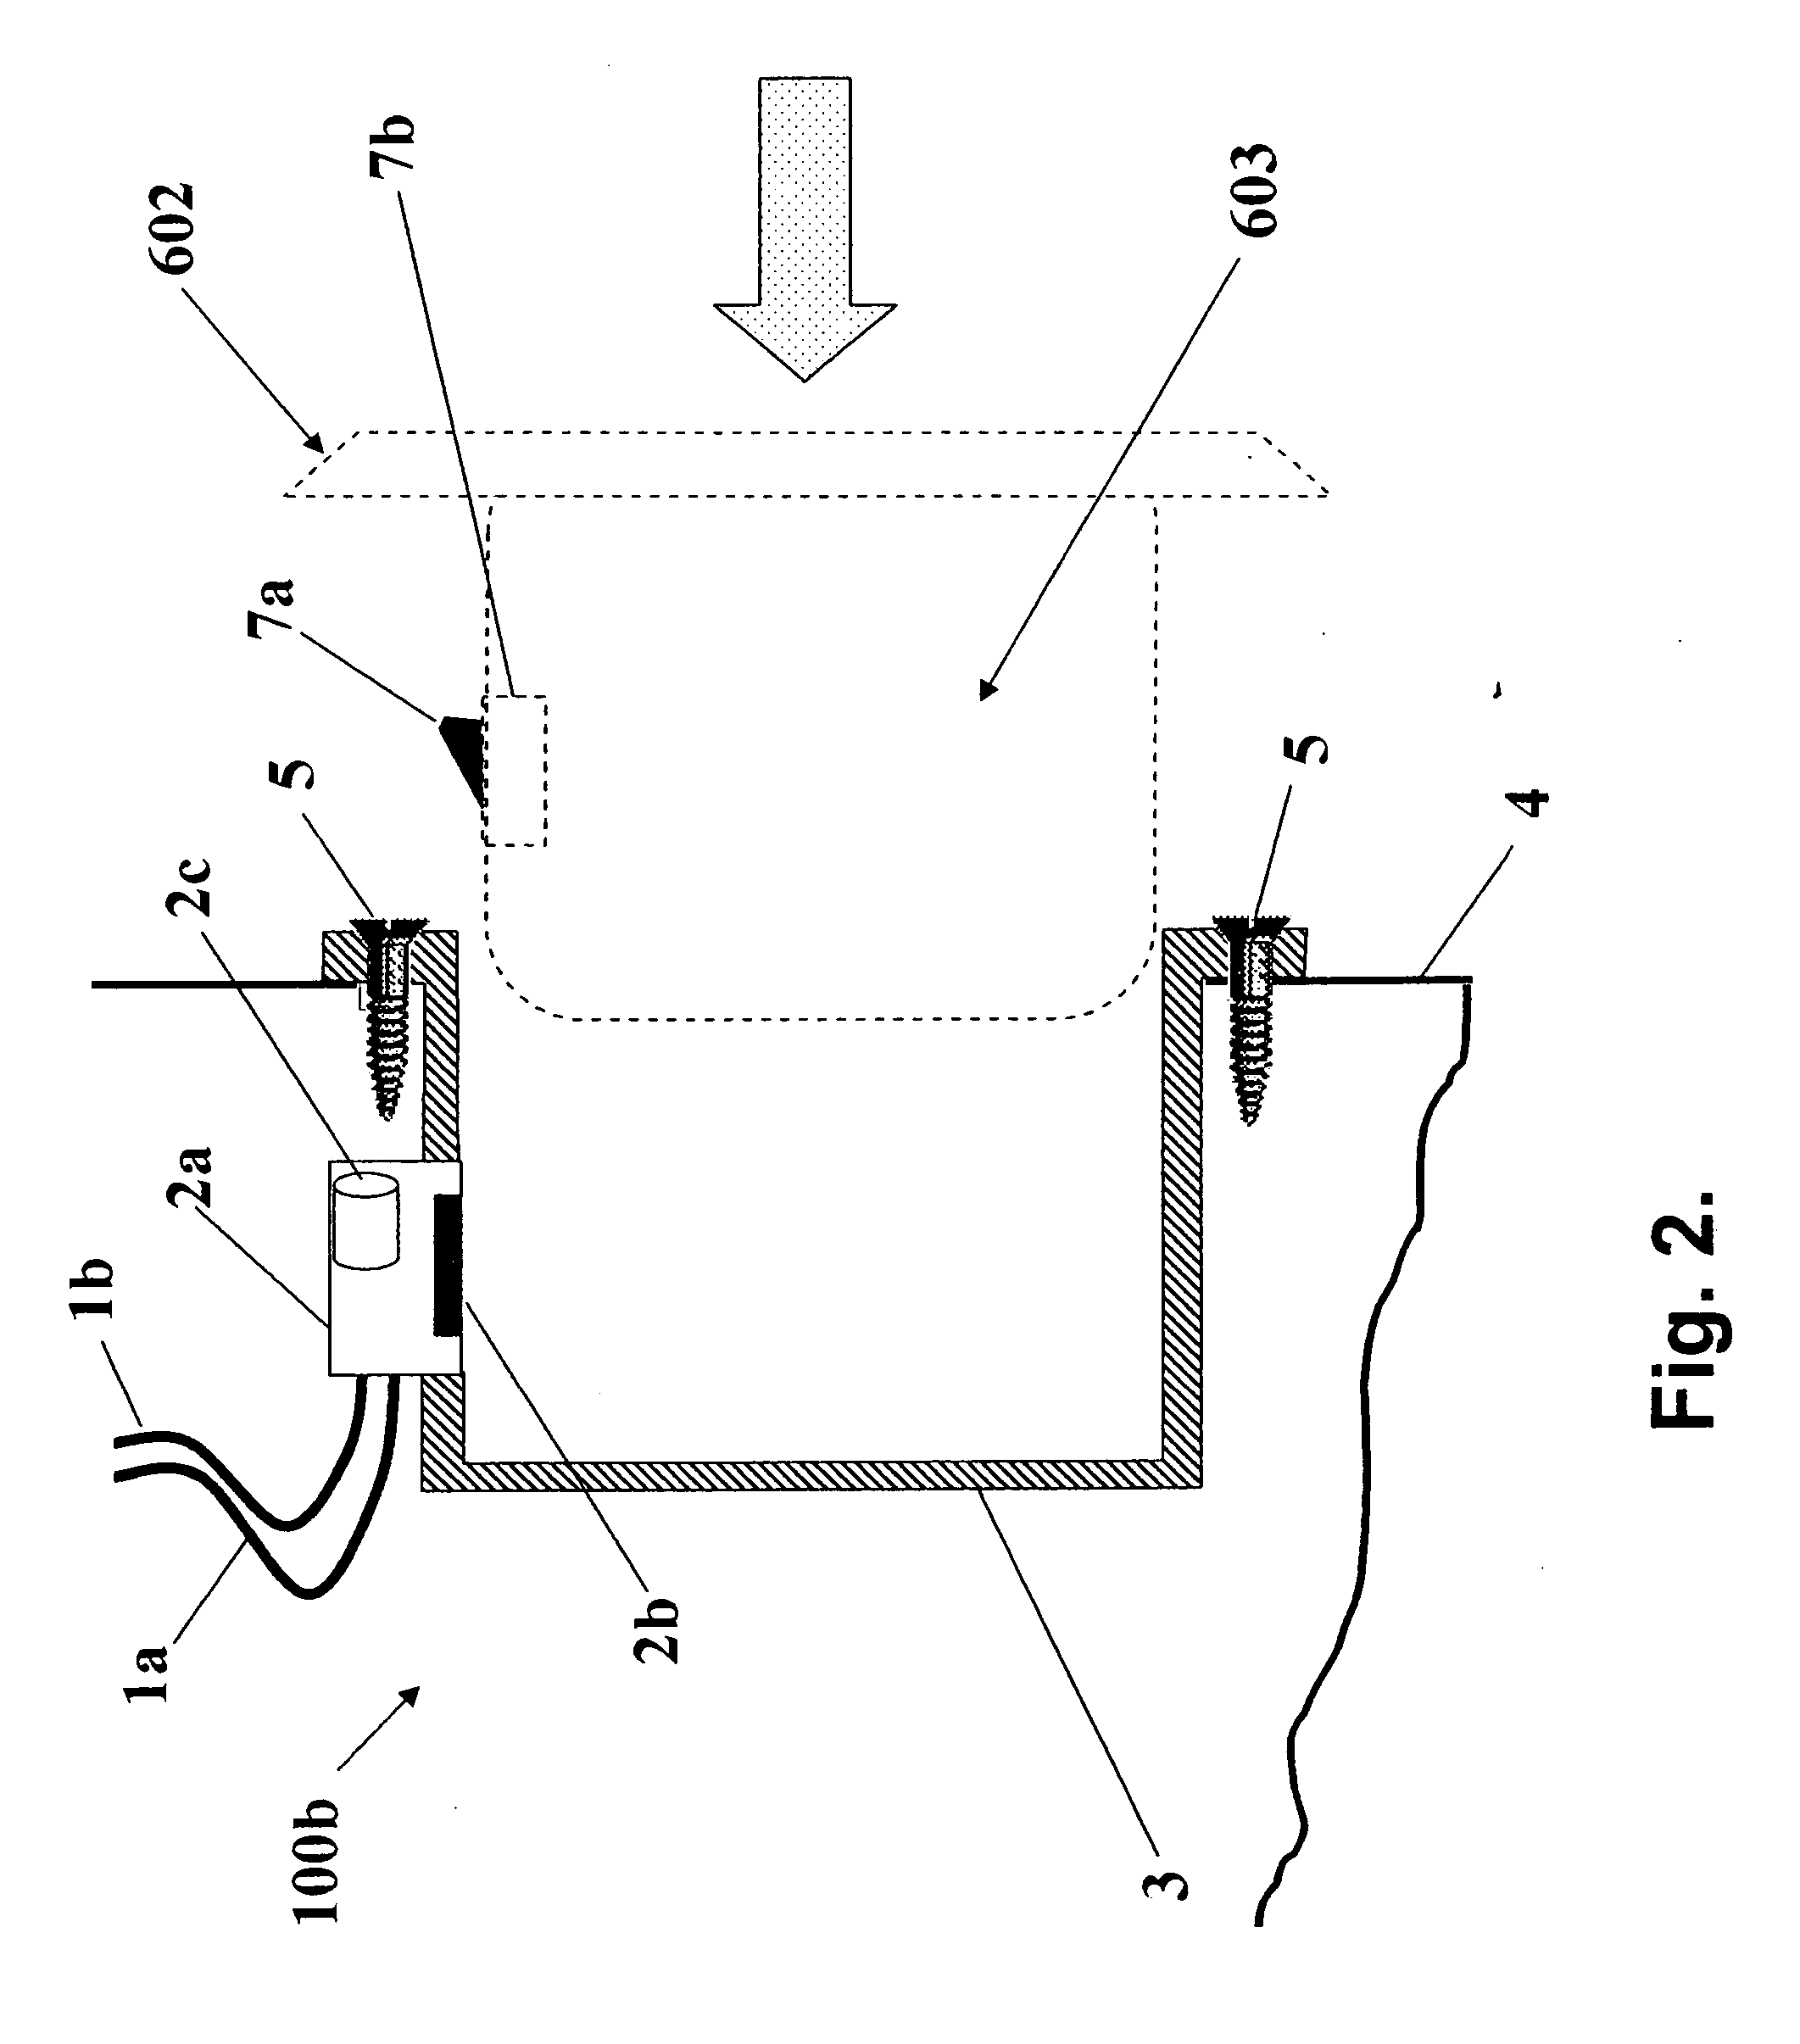 Secured computing system using wall mounted insertable modules